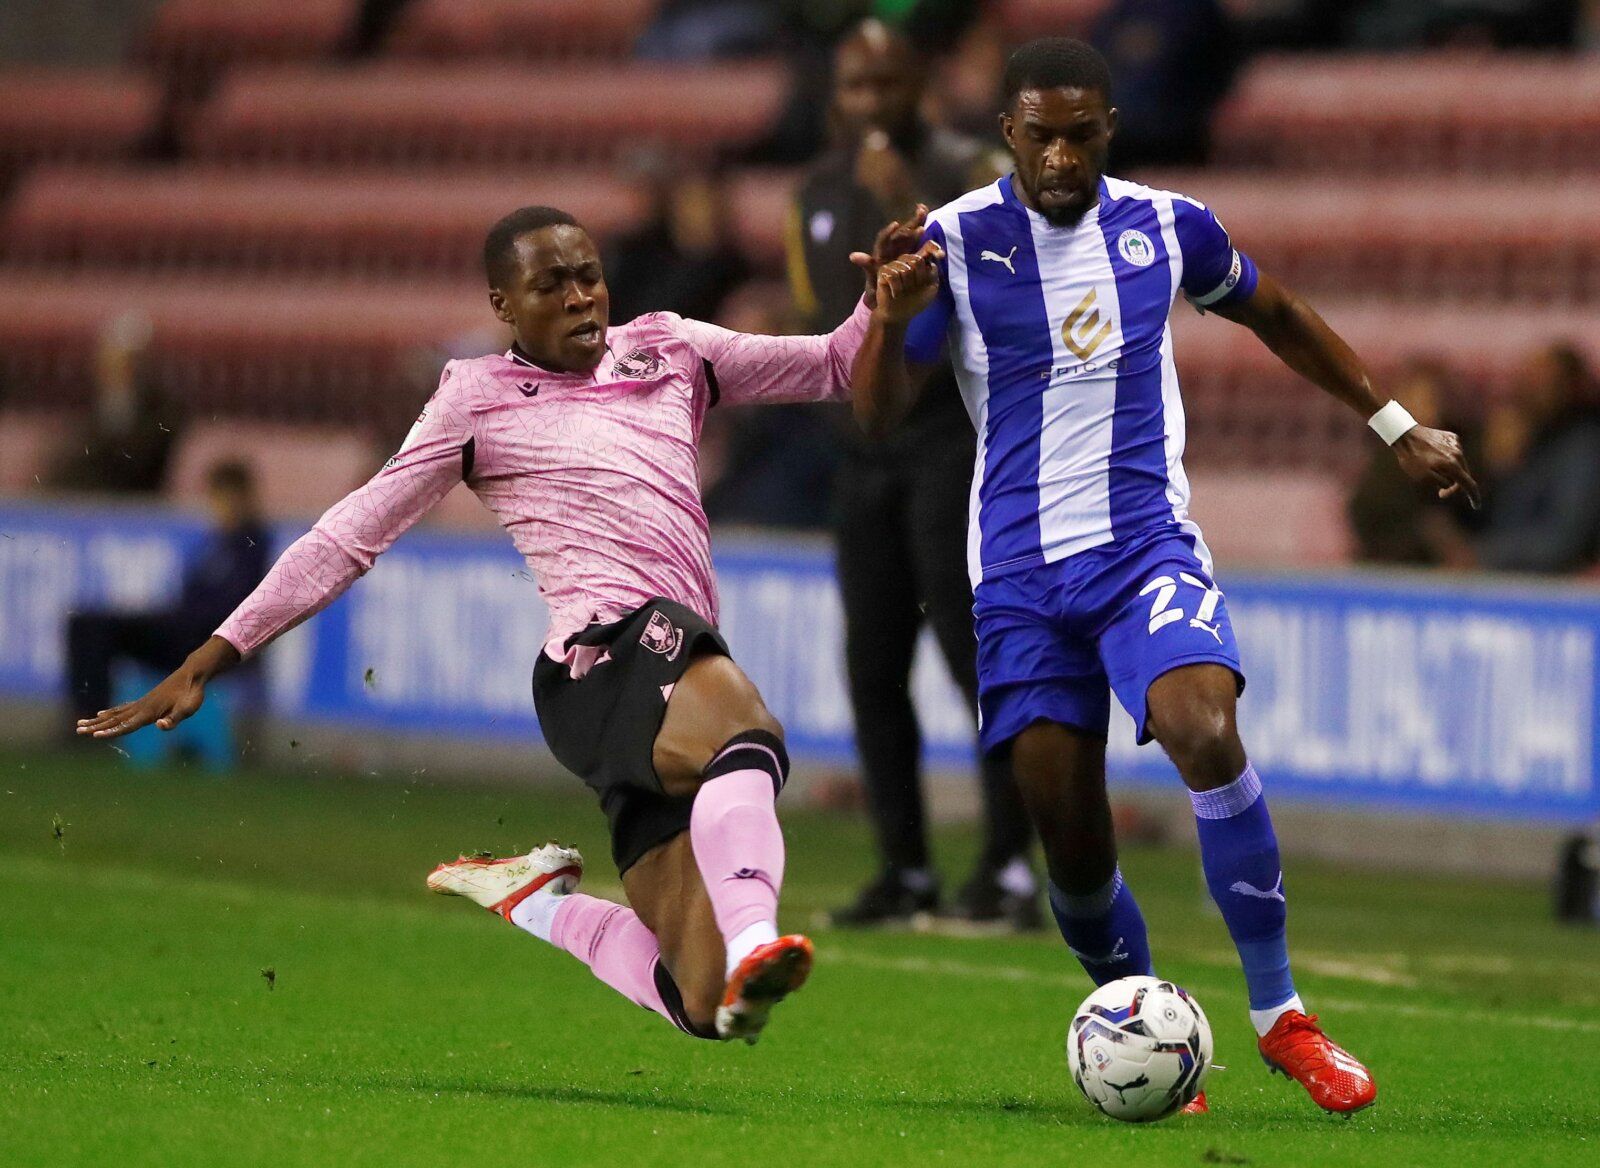 Soccer Football - League One - Wigan Athletic v Sheffield Wednesday - DW Stadium, Wigan, Britain - September 28, 2021 Sheffield Wednesday's Dennis Adeniran in action with Wigan Athletic's Tendayi Darikwa   Action Images/Jason Cairnduff  EDITORIAL USE ONLY. No use with unauthorized audio, video, data, fixture lists, club/league logos or 